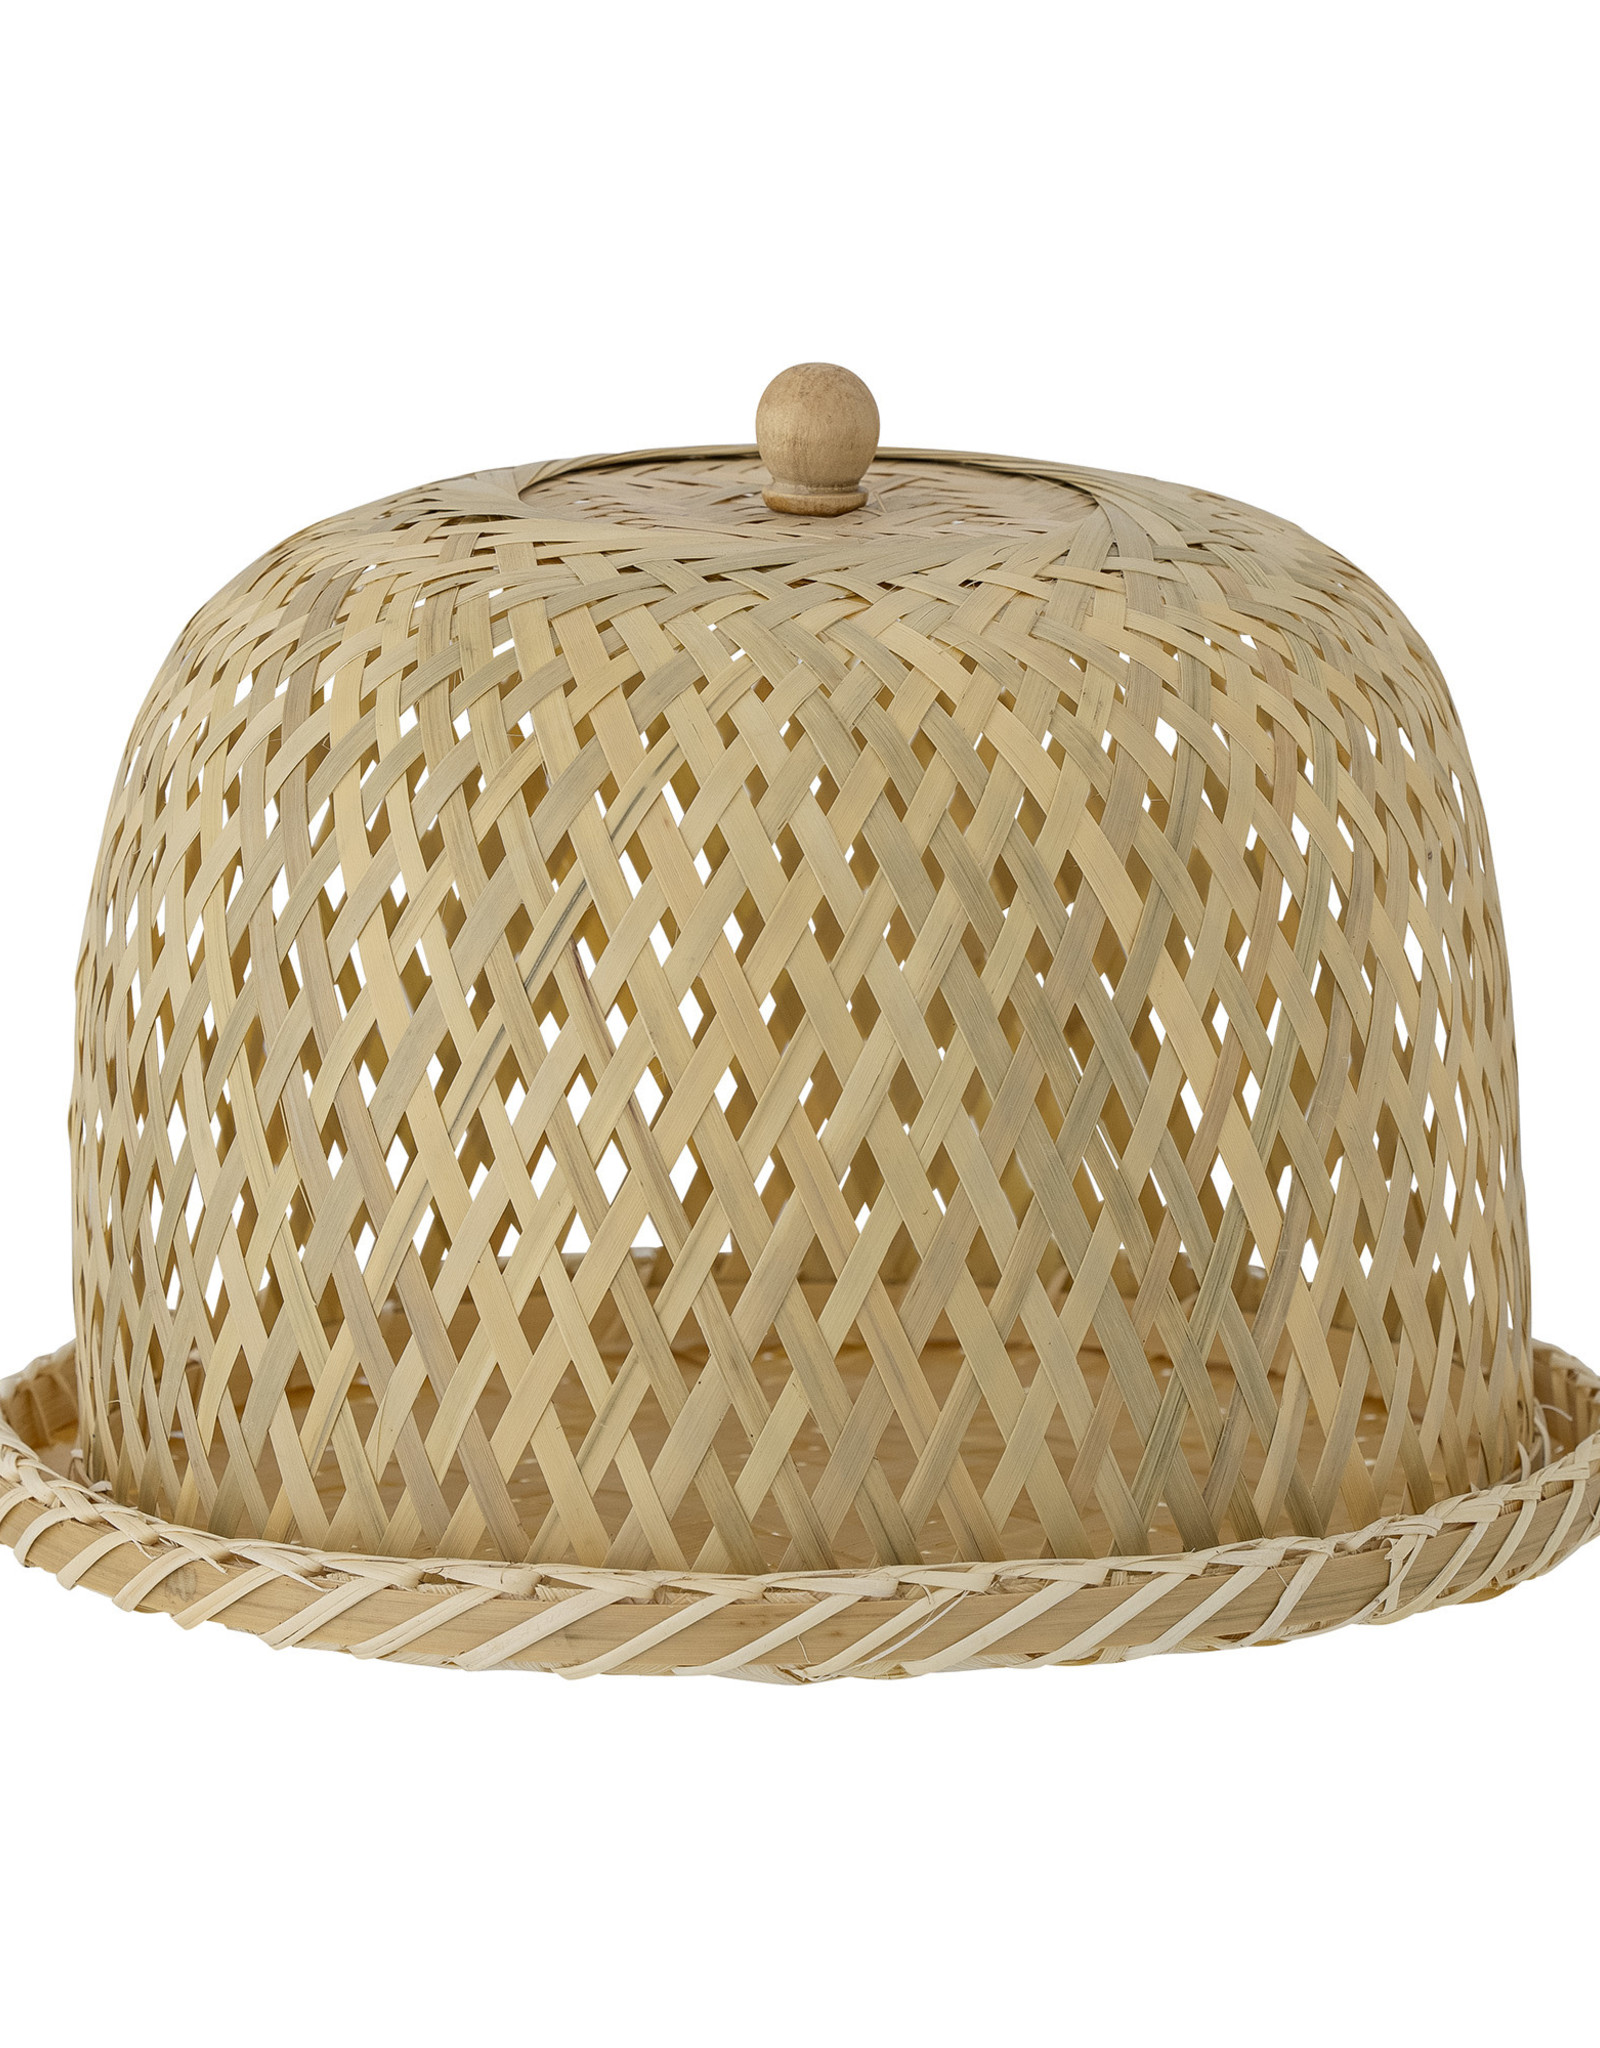 Bloomingville foodcover 'Lullo' - bamboo